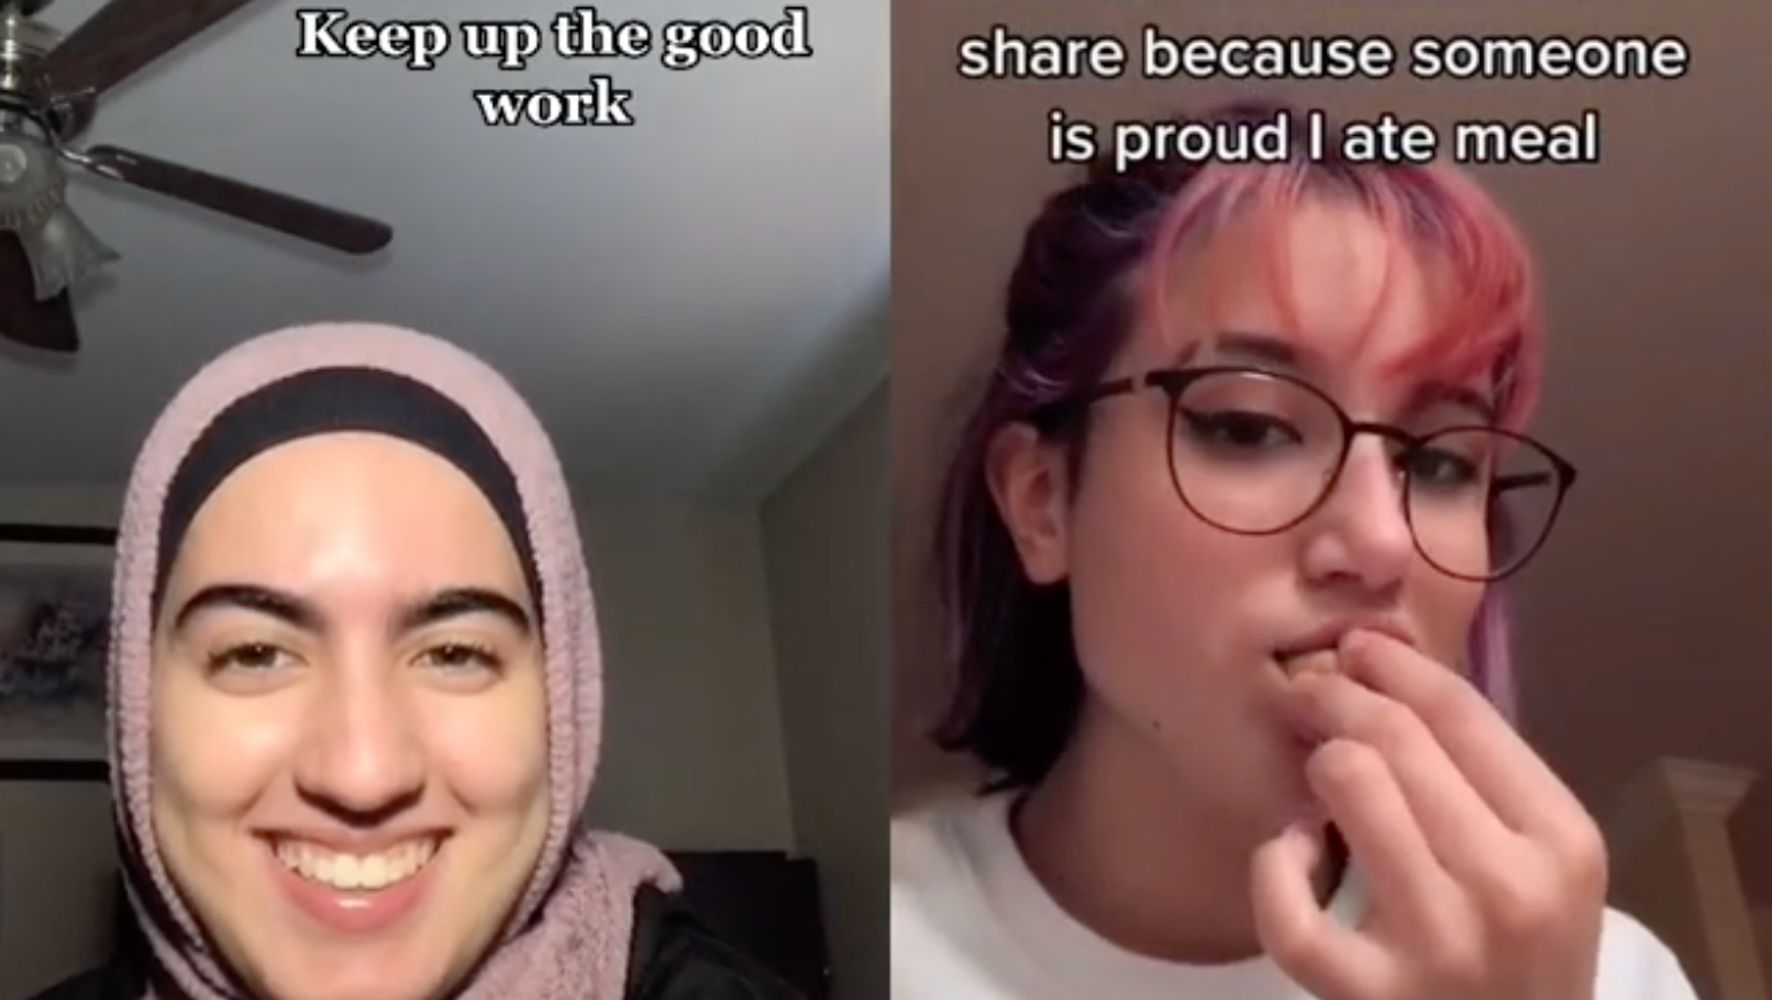 ‘Let’s Eat Together’ Videos On TikTok Help Teens Struggling With Eating Disorders